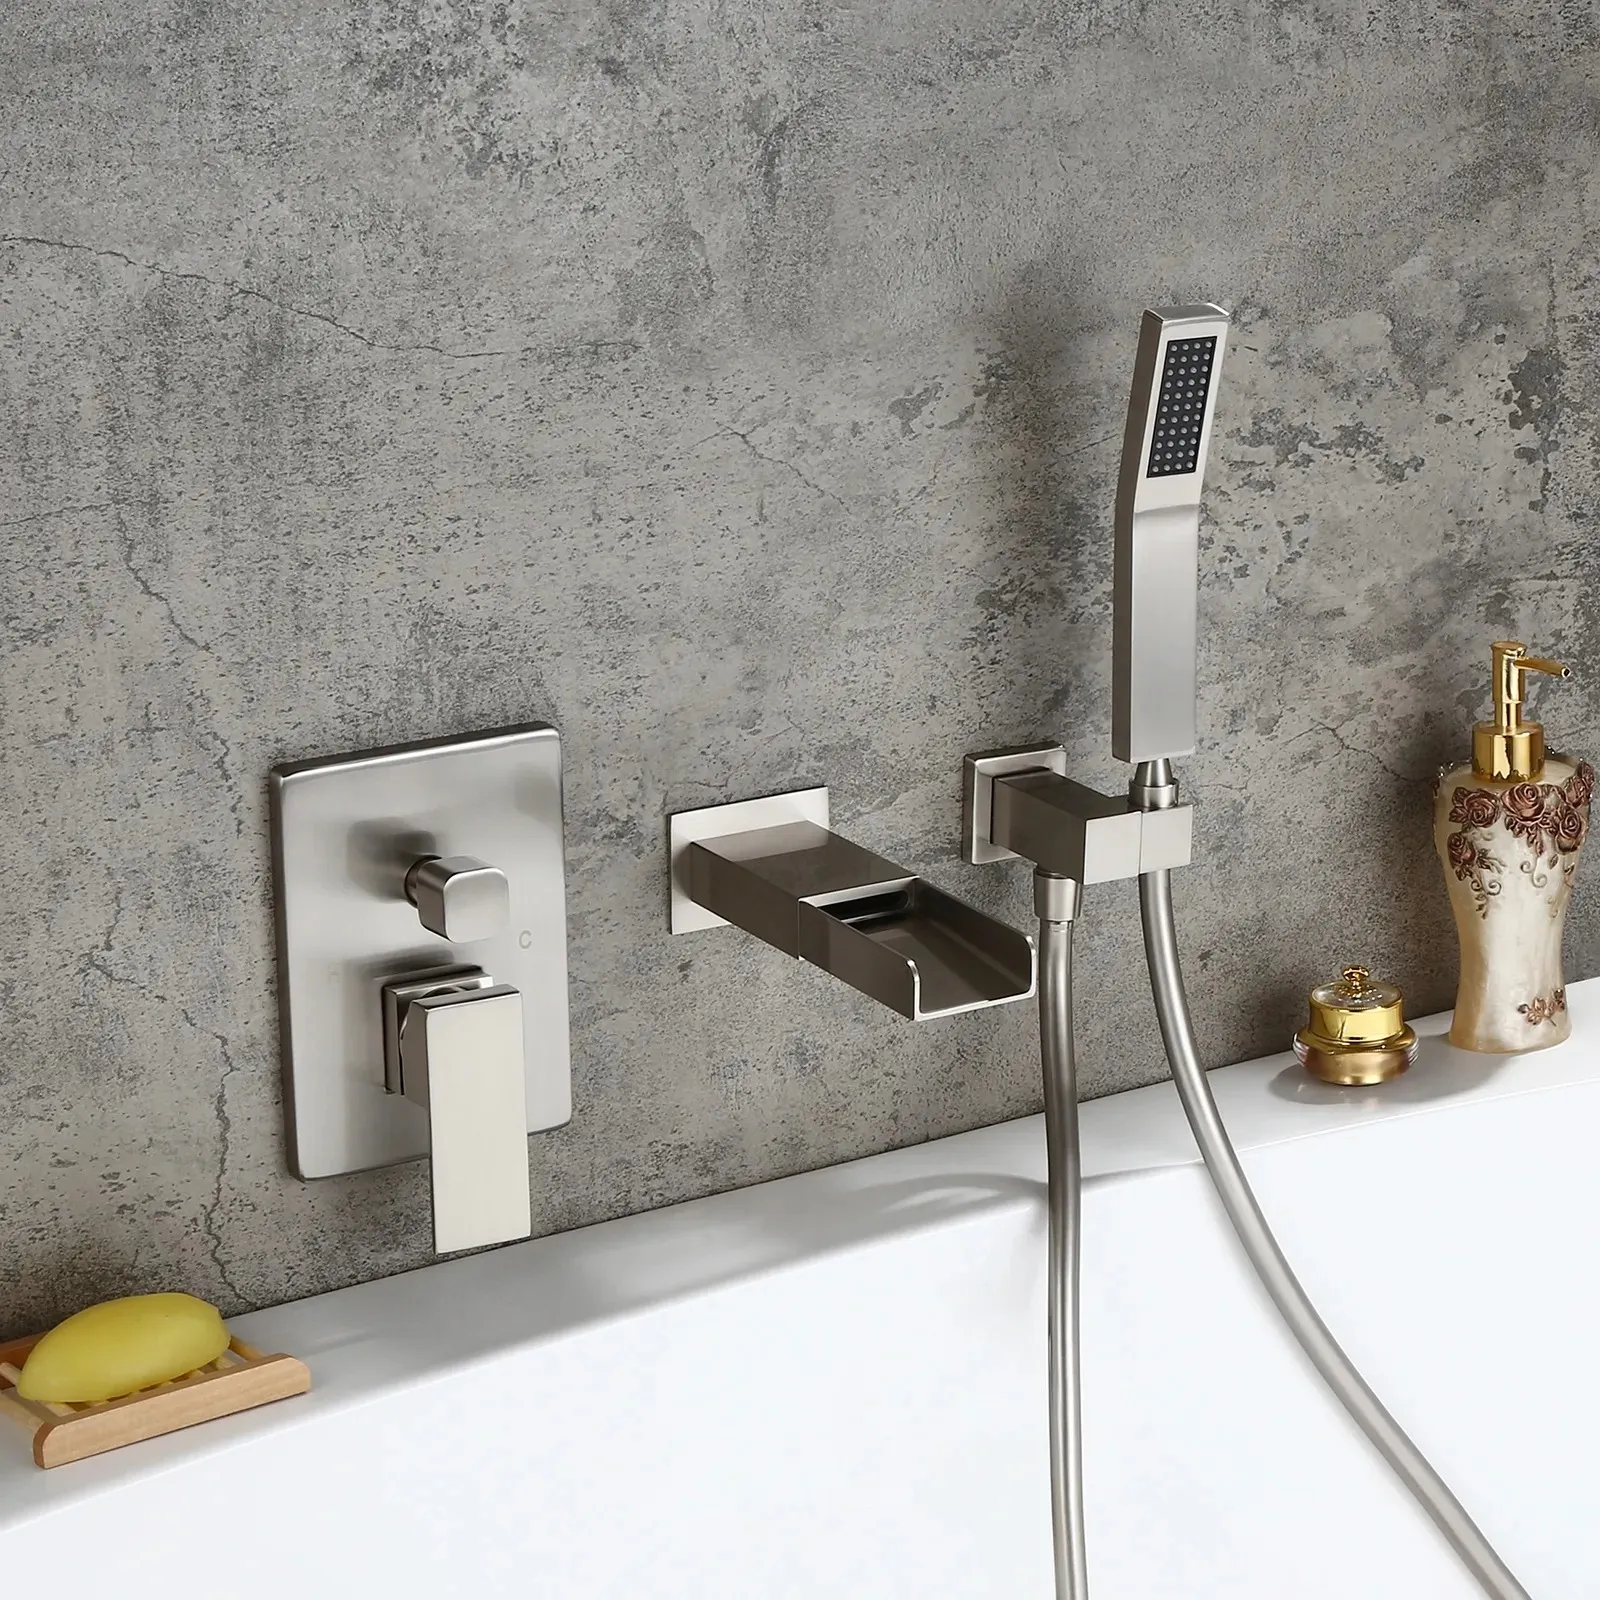 Best Rust-Resistant:Homary Wall-Mounted Tub Faucet